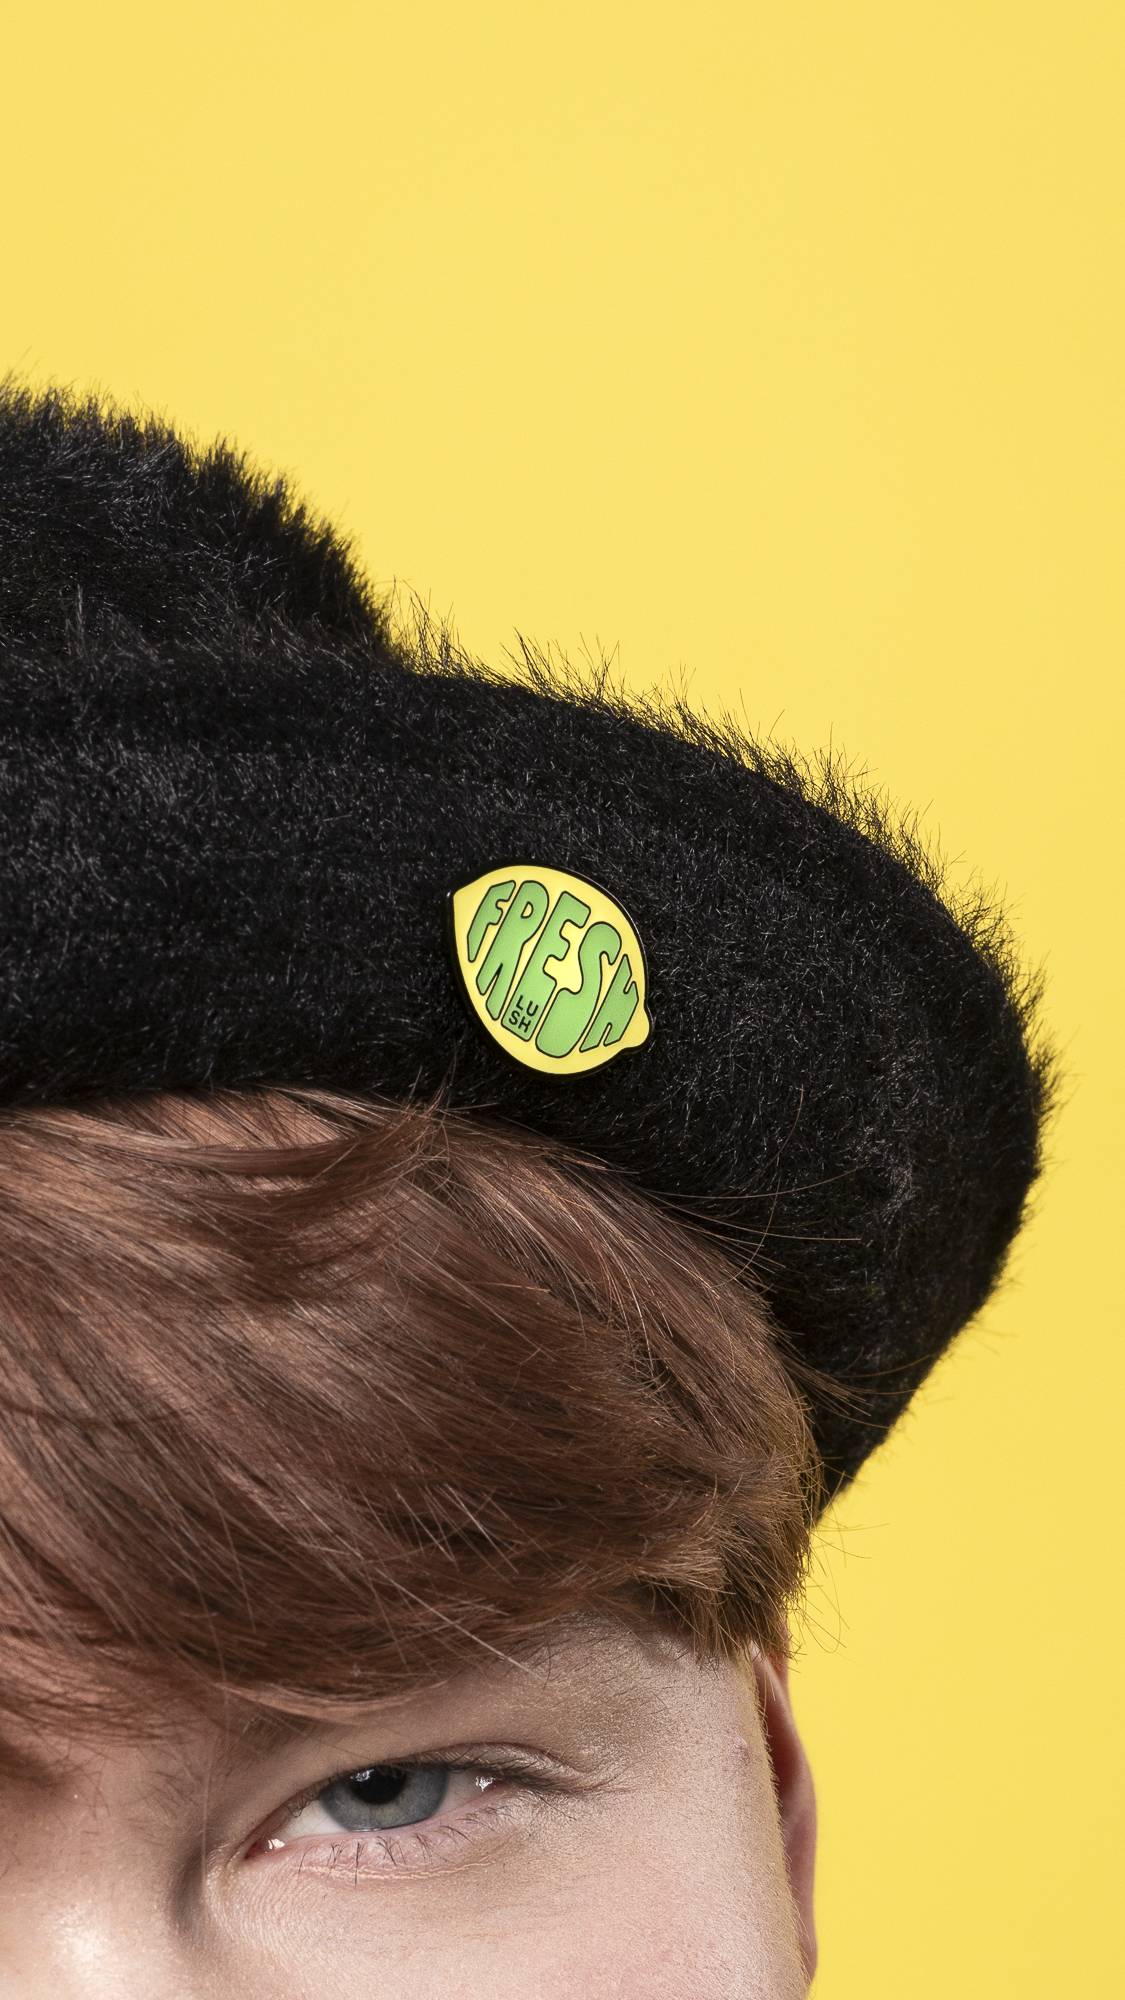 A super close-up of the model's face and head wearing a black hat with the Fresh Values pin badge attached.